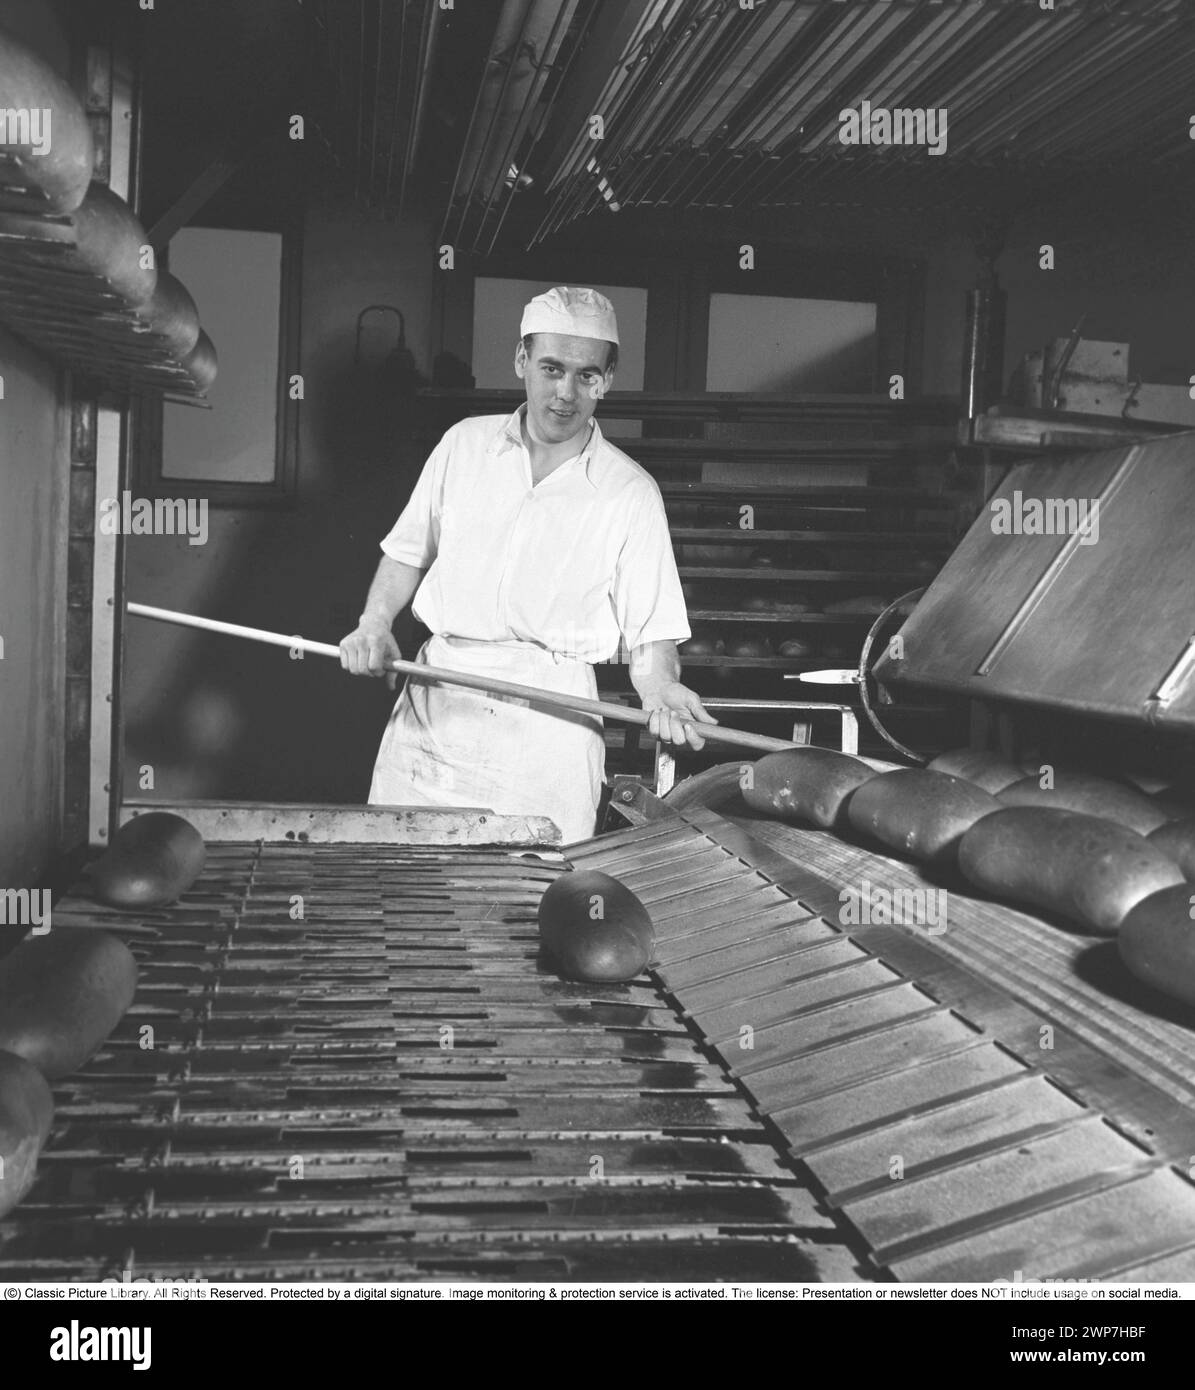 Bakery in the 1950s. A man working in the bakery, handling the loafs of bread ready baked. This is a industrial bakery, baking thousands of bread called HåWe bakery in Karlstad Sweden. February 1952. Stock Photo